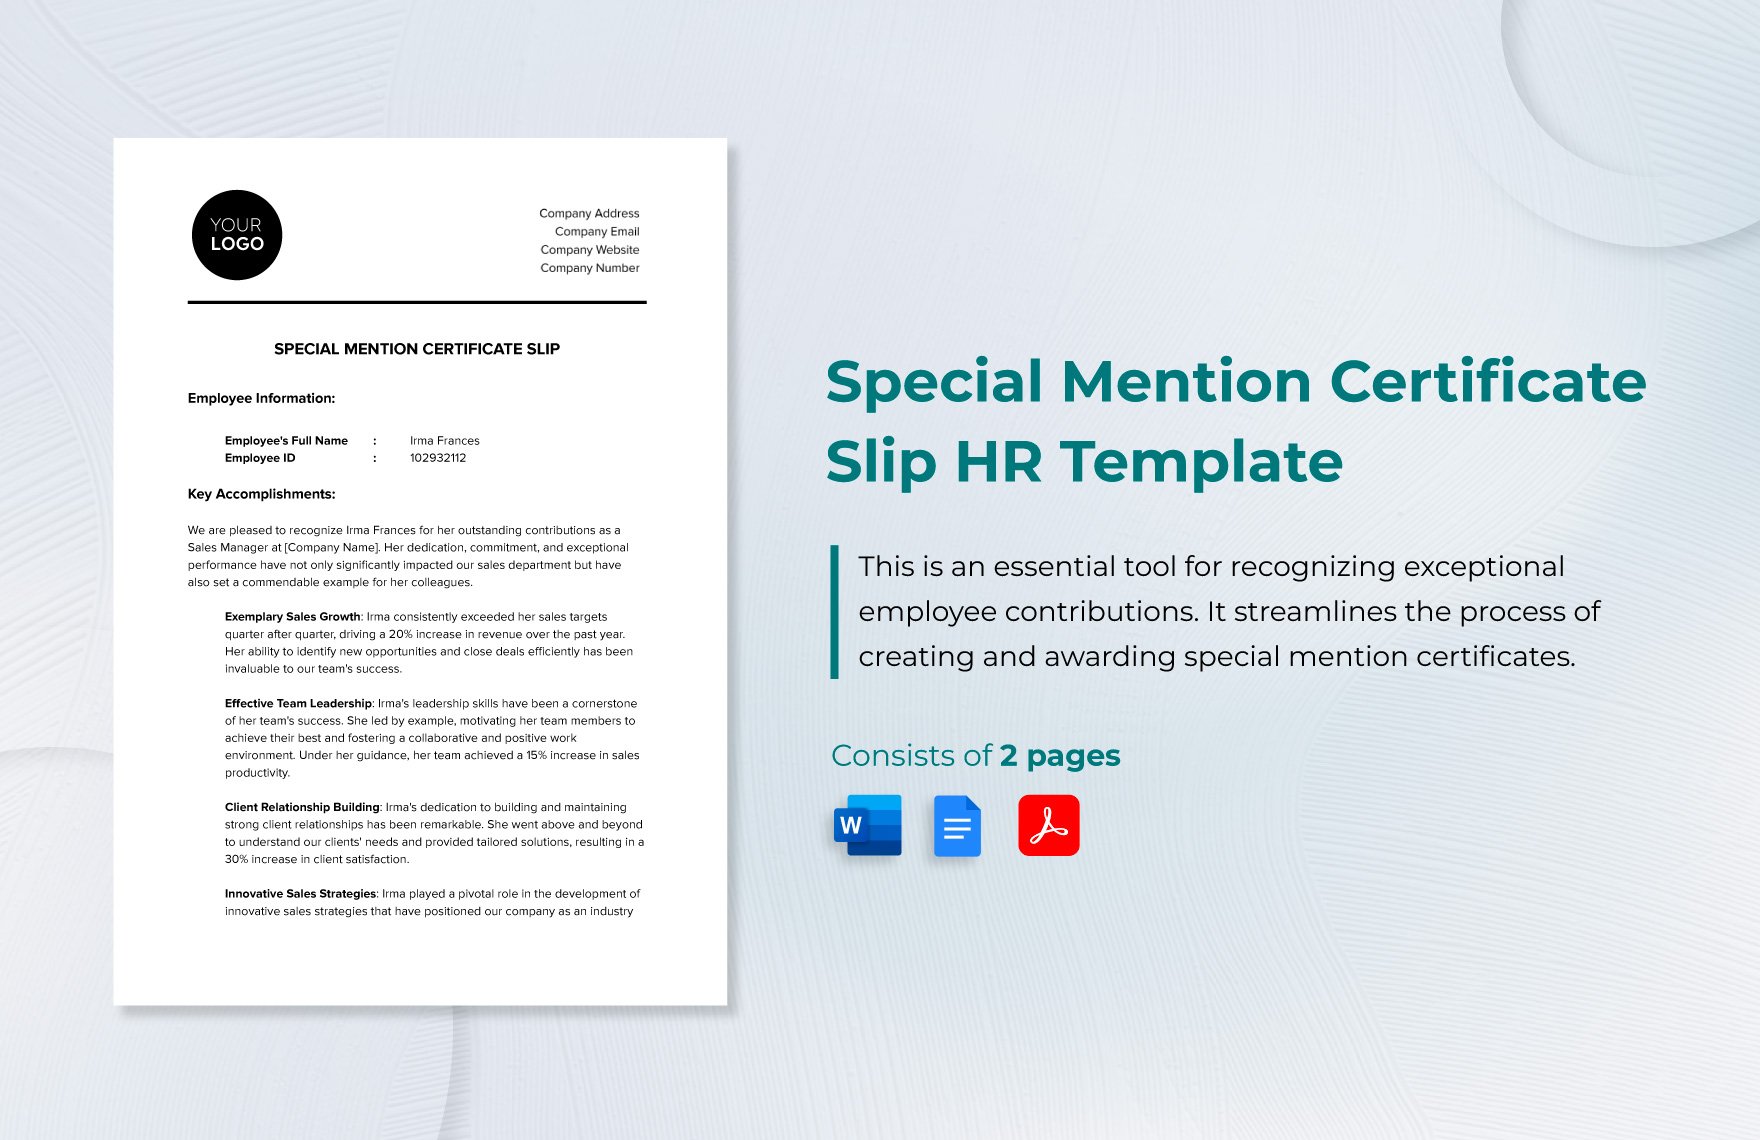 Special Mention Certificate Slip HR Template in Word, Google Docs, PDF